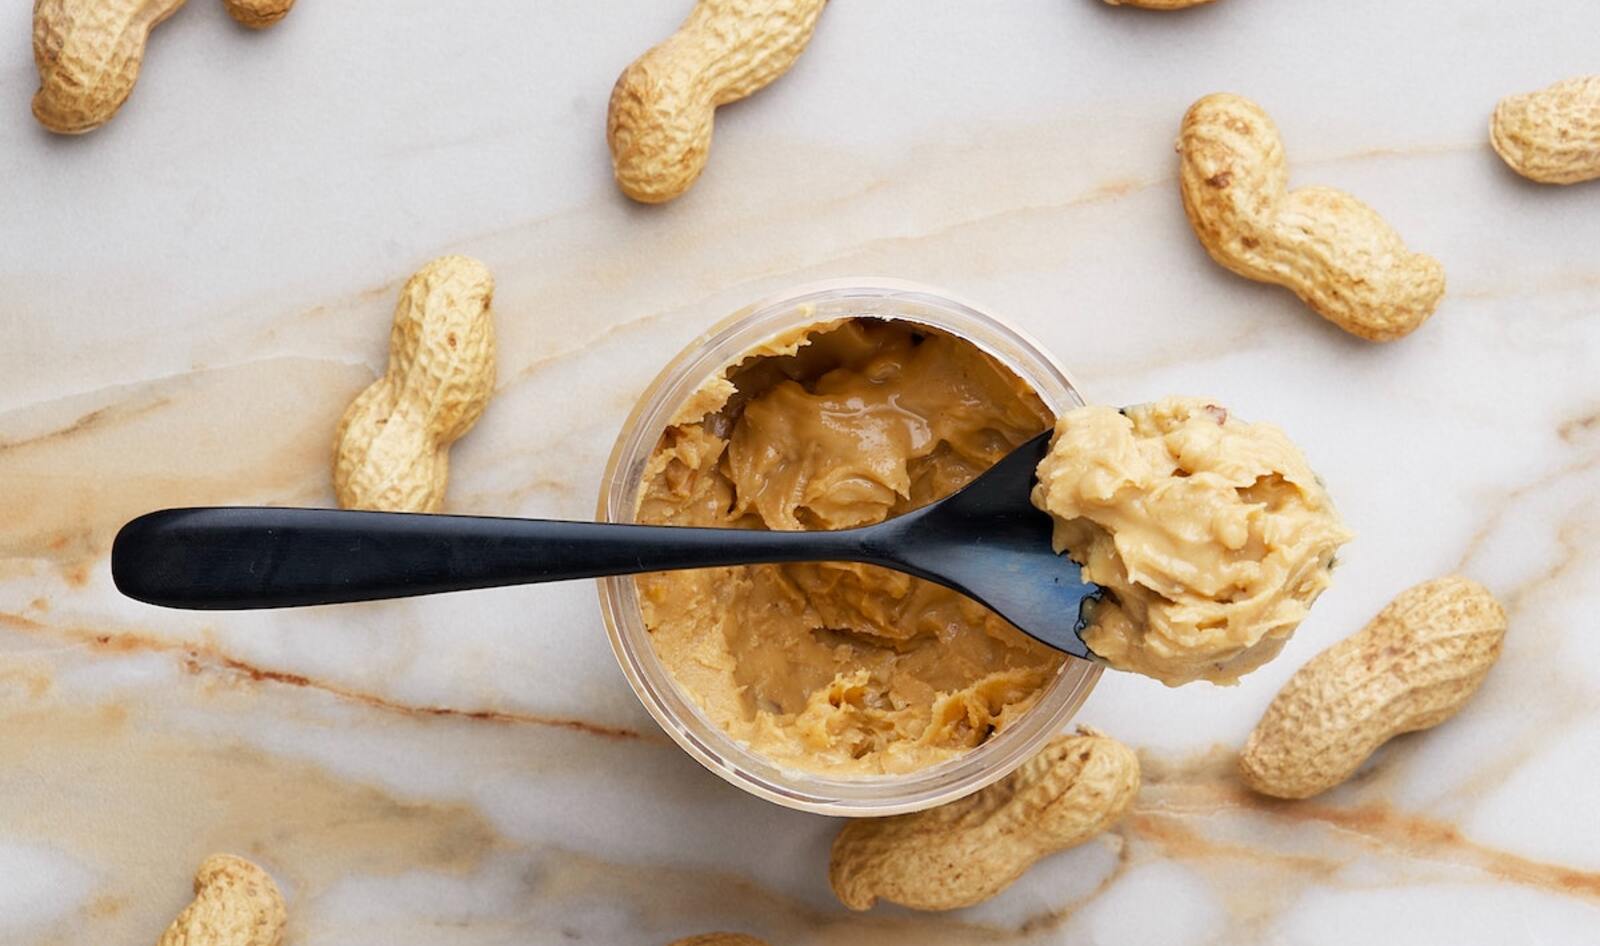 Is Nut Butter Healthy? Here Are the Best Vegan Options